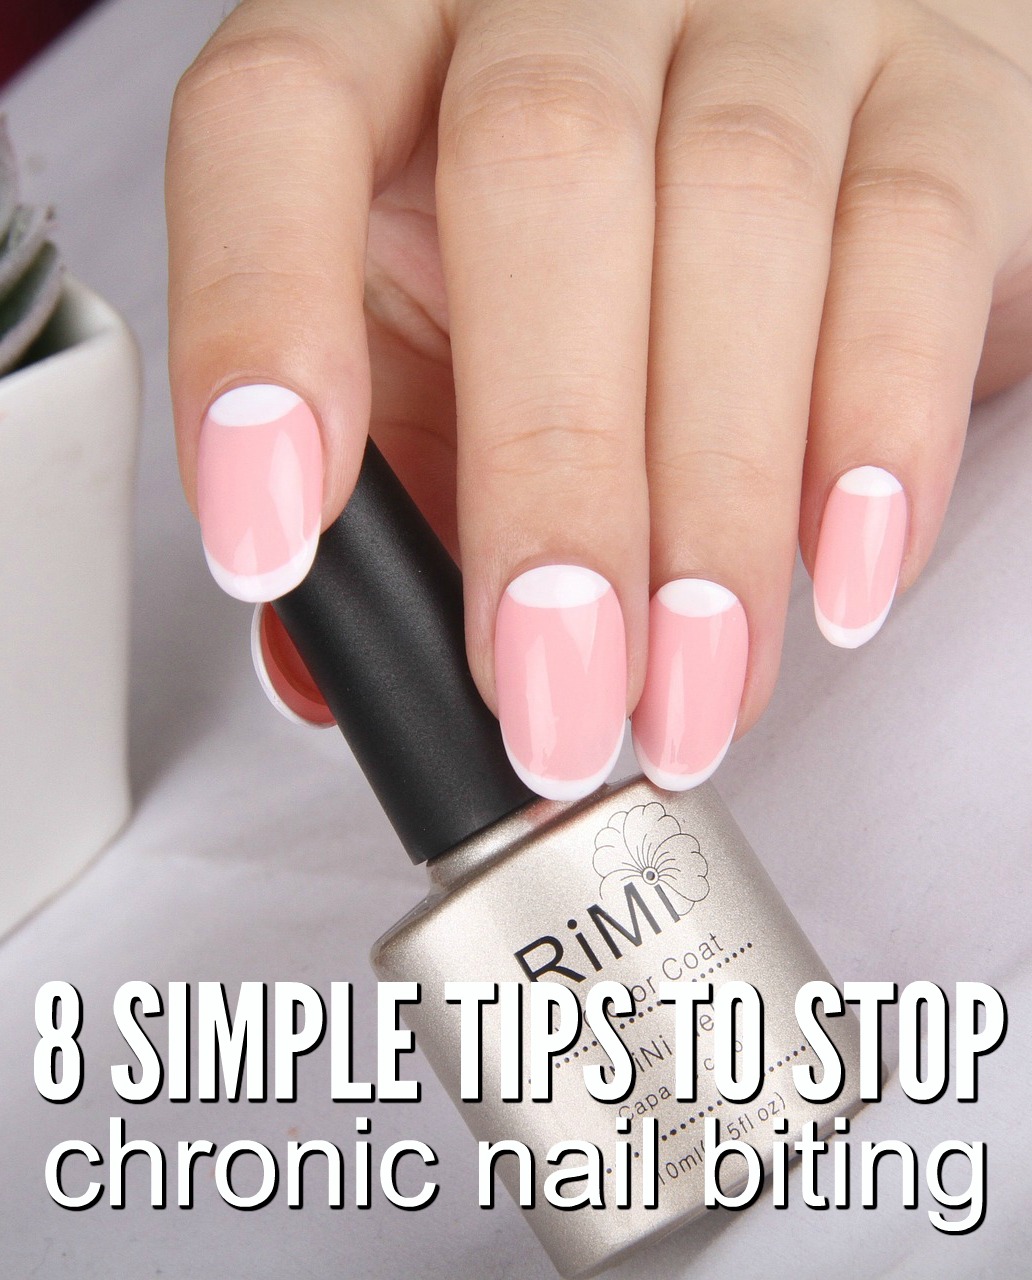 Stop Biting Your Nails Fast With These Simple Tips - The Socialite's Closet